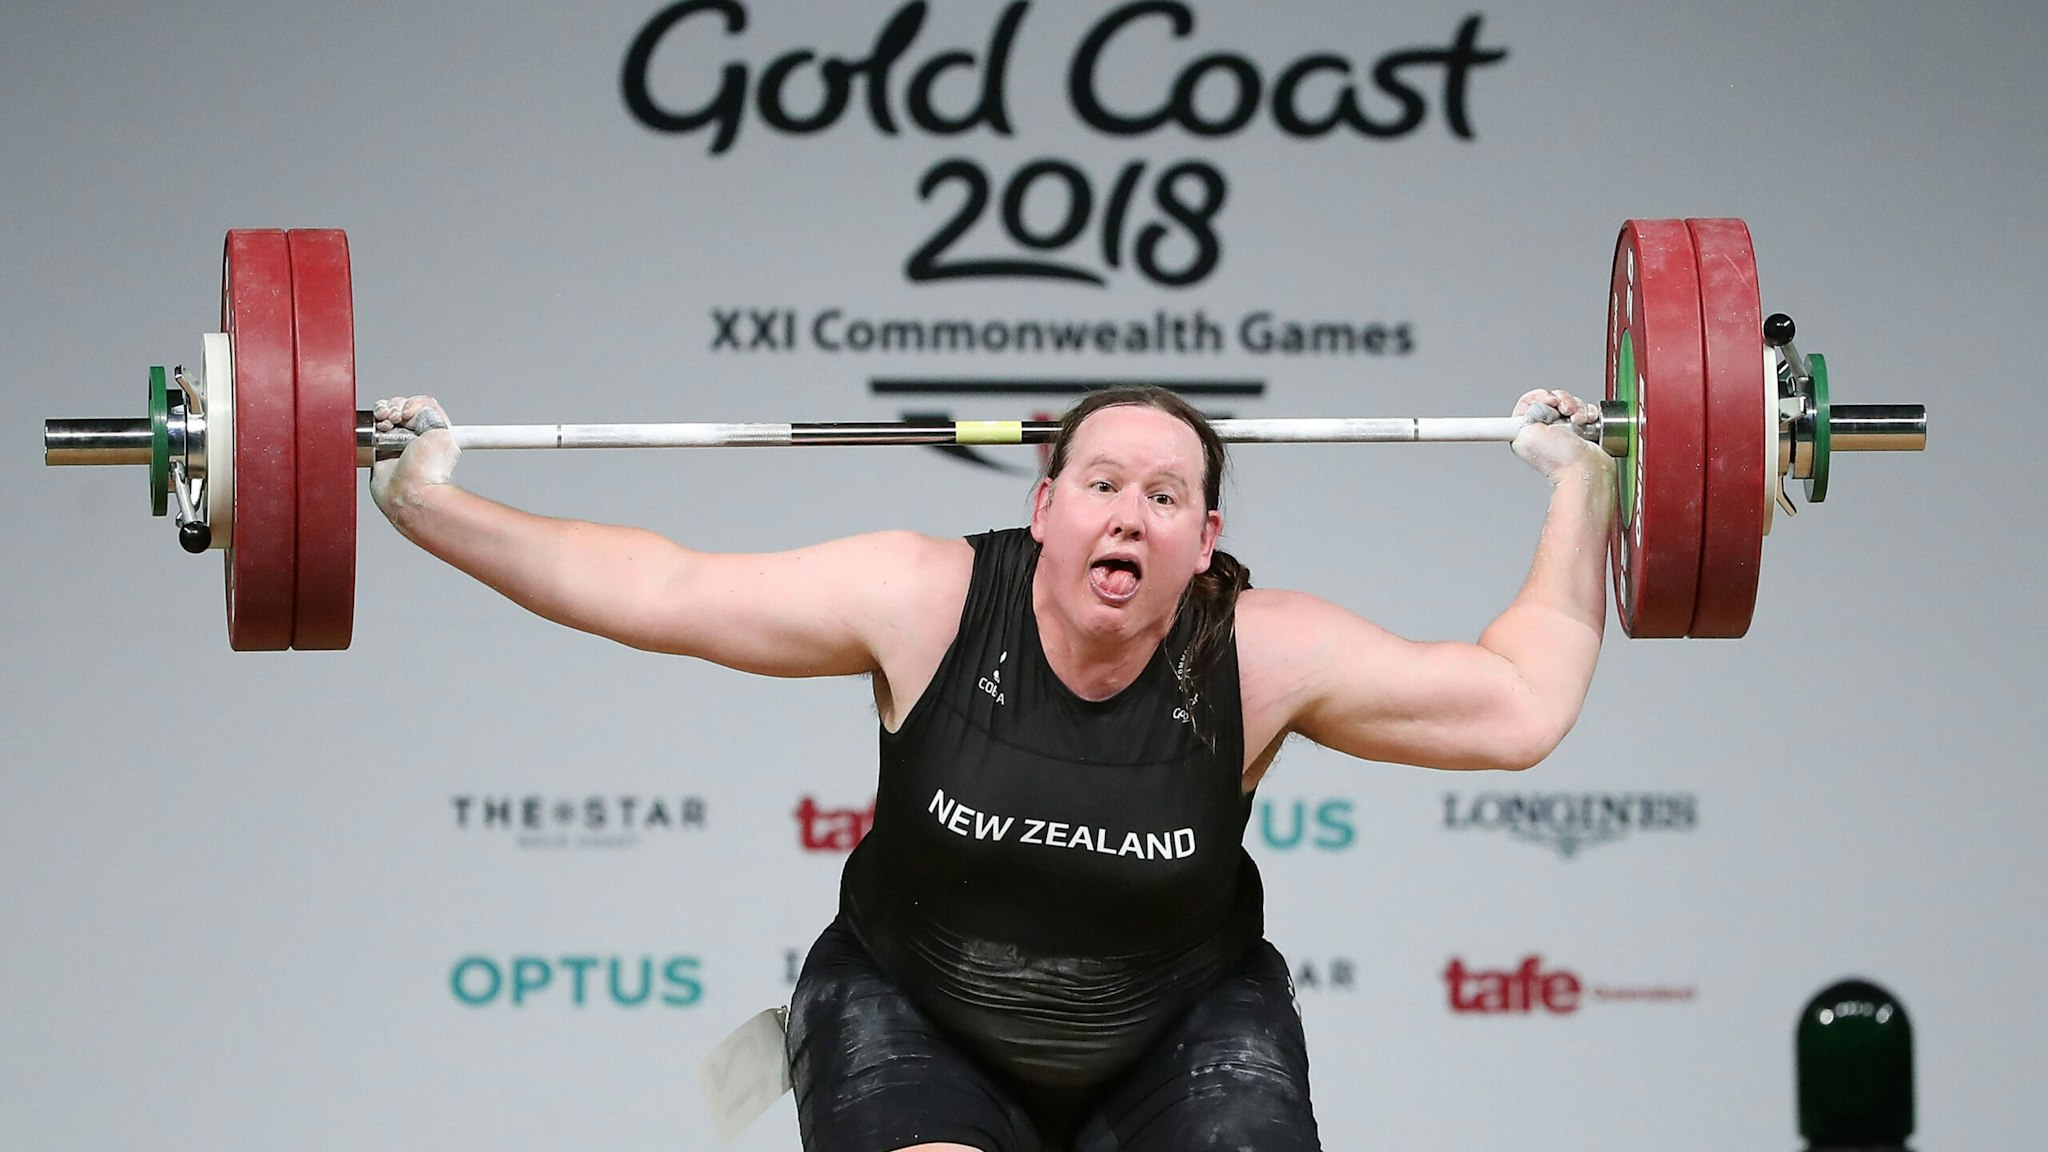 GOLD COAST, AUSTRALIA - APRIL 09: Laurel Hubbard of New Zealand reacts as she drops the bar in the Women's +90kg Final during the Weightlifting on day five of the Gold Coast 2018 Commonwealth Games at Carrara Sports and Leisure Centre on April 9, 2018 on the Gold Coast, Australia.